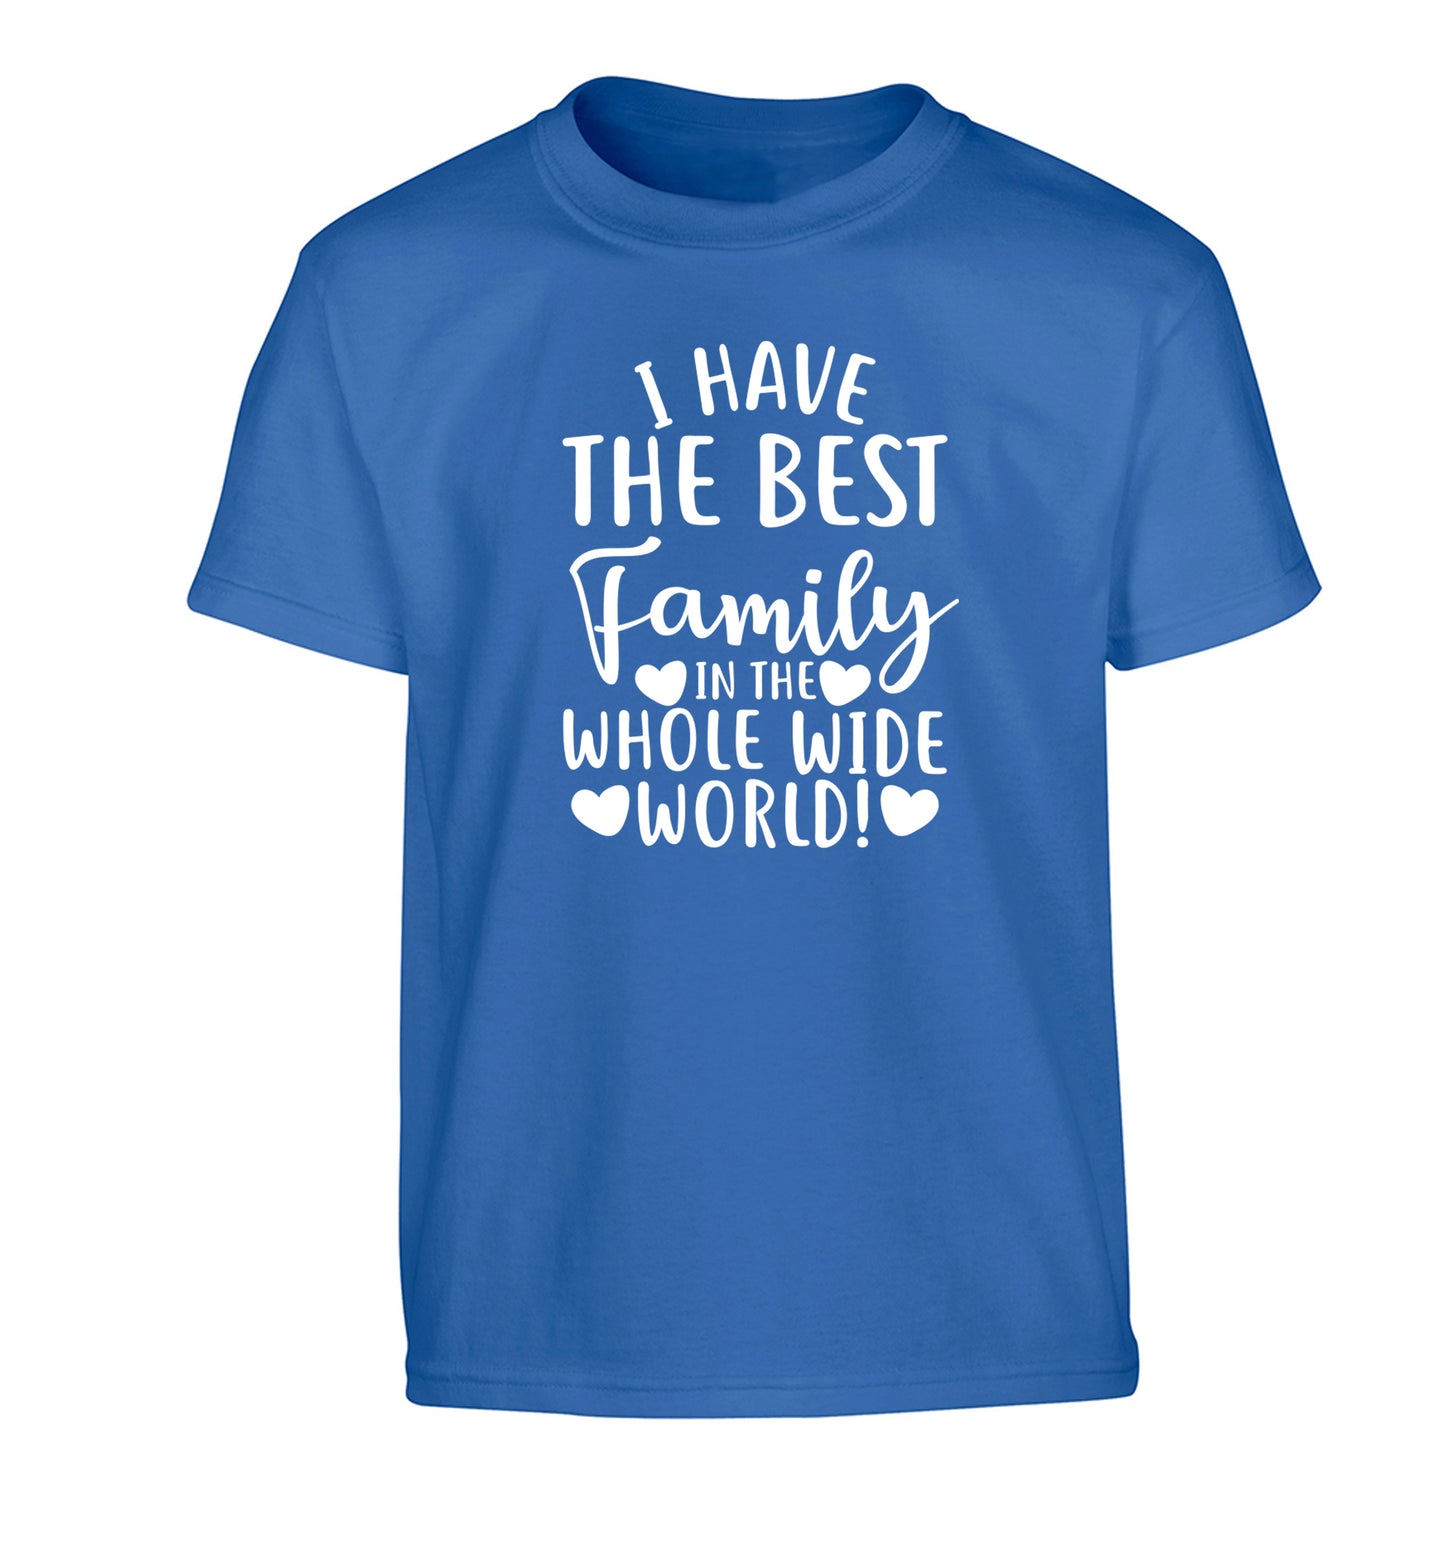 I have the best family in the whole wide world! Children's blue Tshirt 12-13 Years